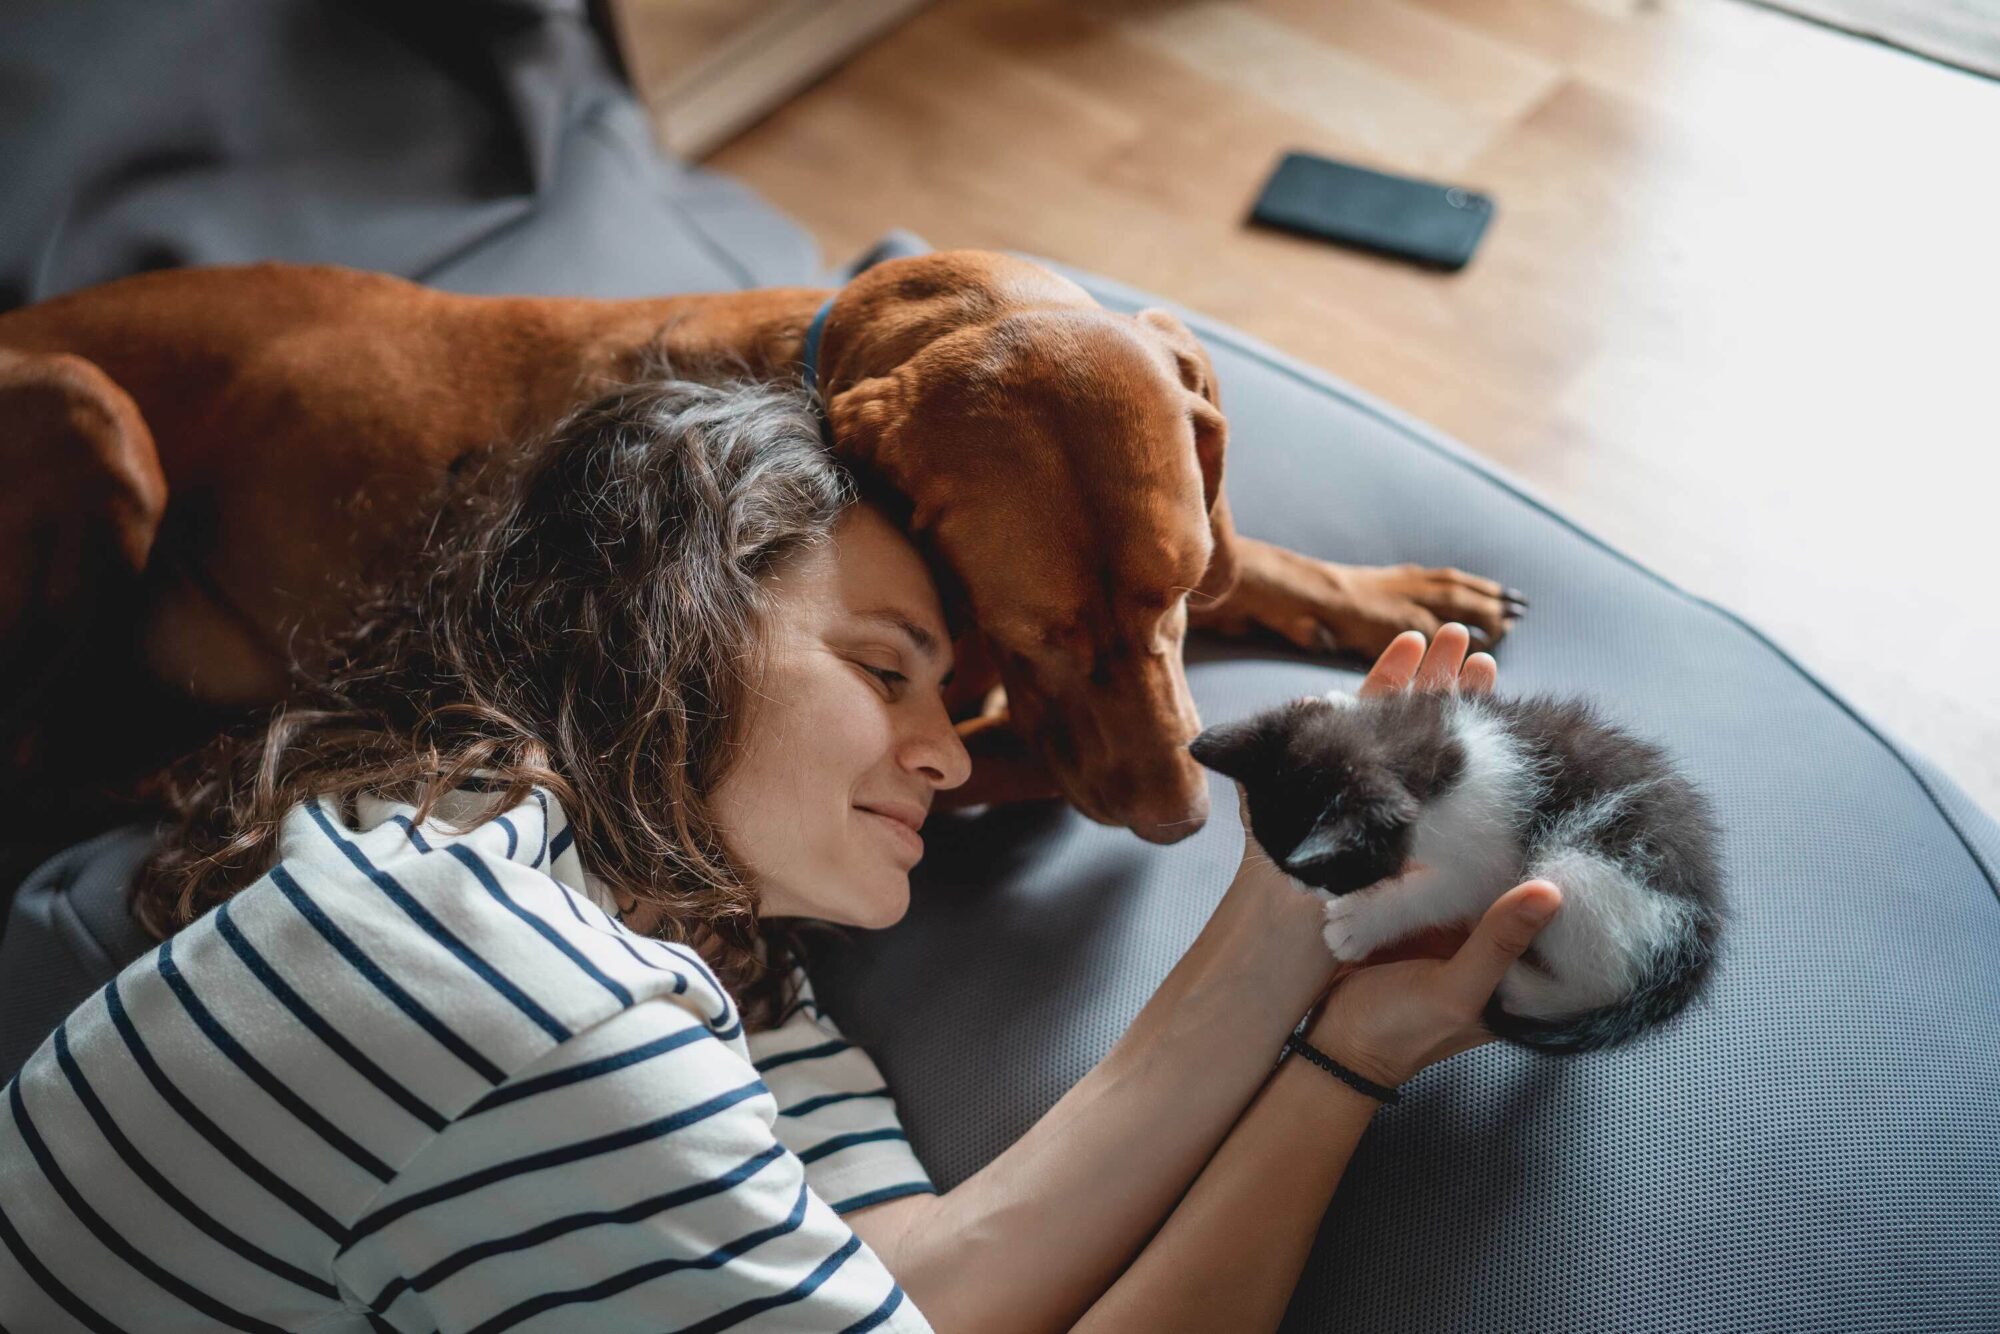 A woman playing with a dog and a kitten on a couch